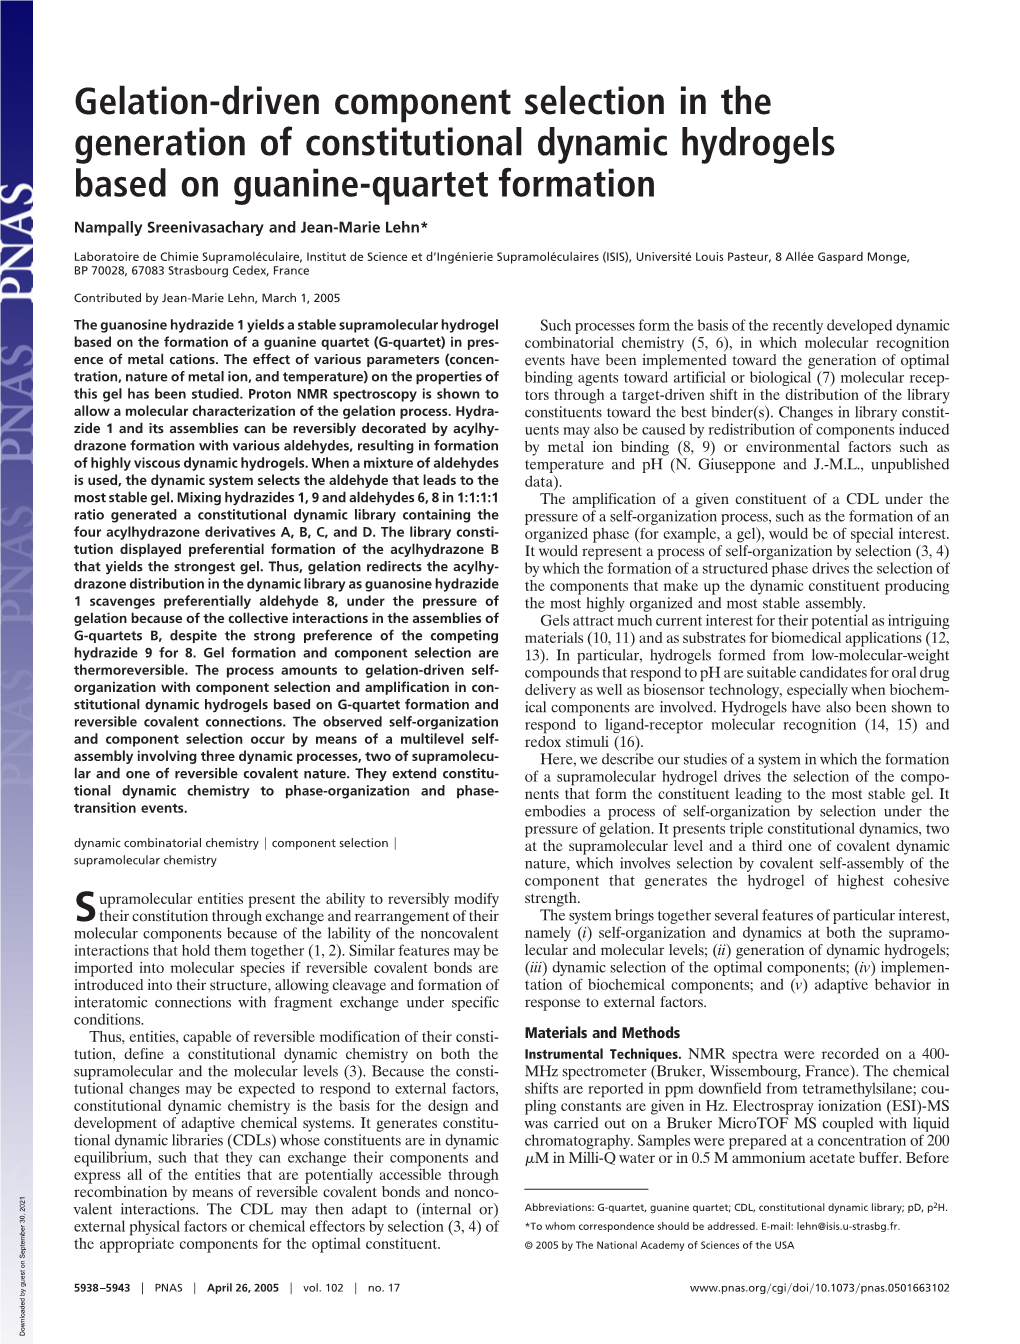 Gelation-Driven Component Selection in the Generation of Constitutional Dynamic Hydrogels Based on Guanine-Quartet Formation